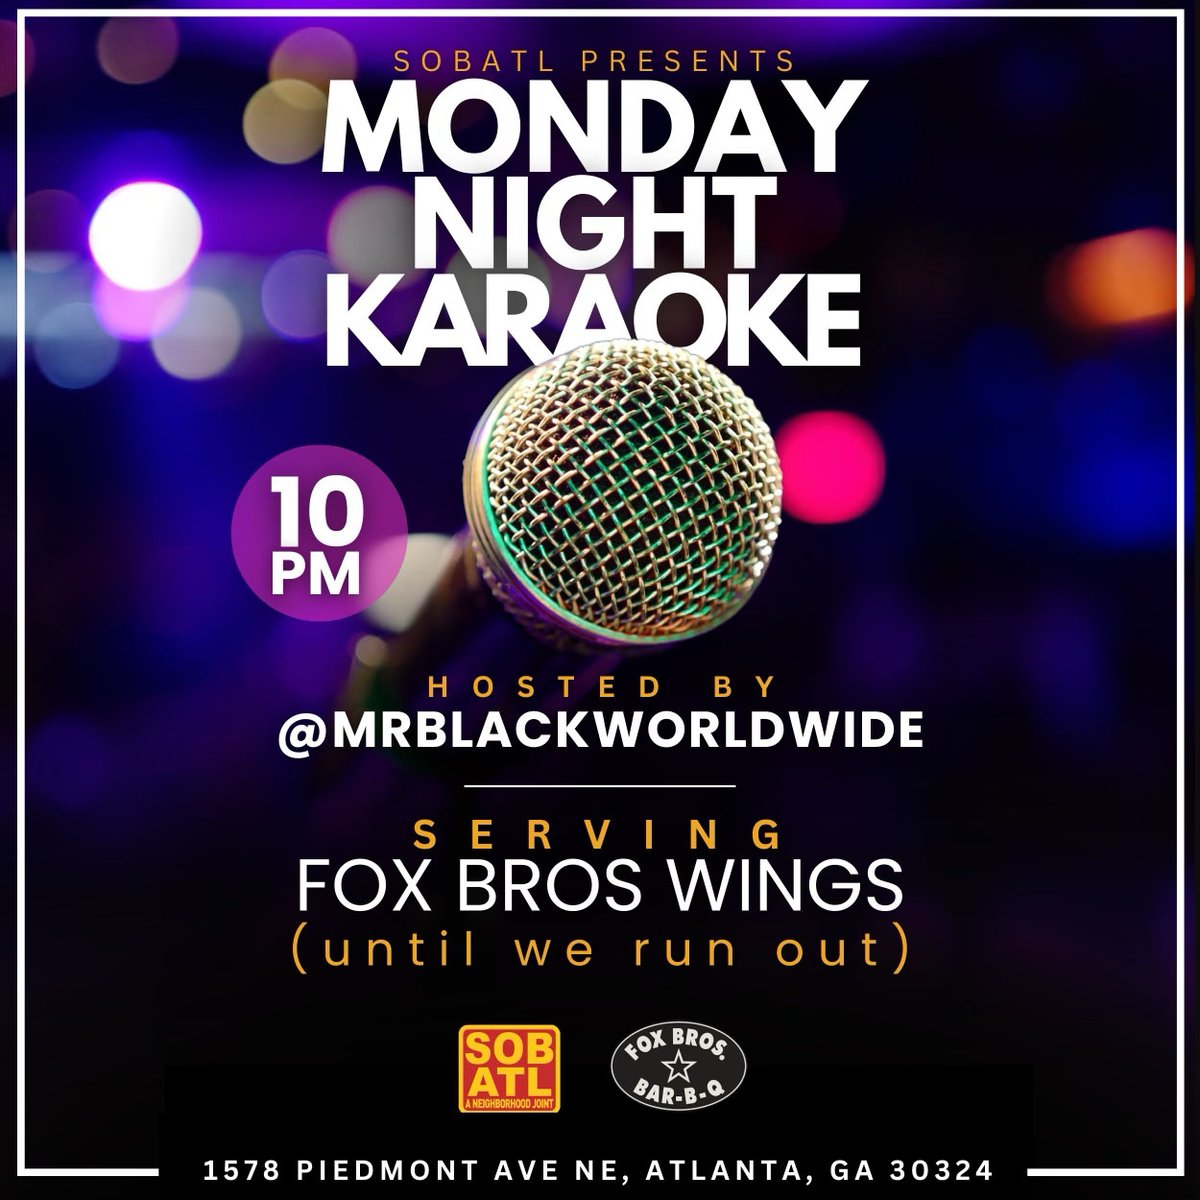 Don't forget our 🆕 Monday Nights!⁠ The Middle Room at 🕖️ 7 pm:⁠ Weekly Jazz Jam 🎷🎸 w/ Arkose & Friends⁠ Followed by Karaoke with @mrblackworldwide⁠ 🍴Serving Fox Brothers wings 🔥🍗 until we run out 💨